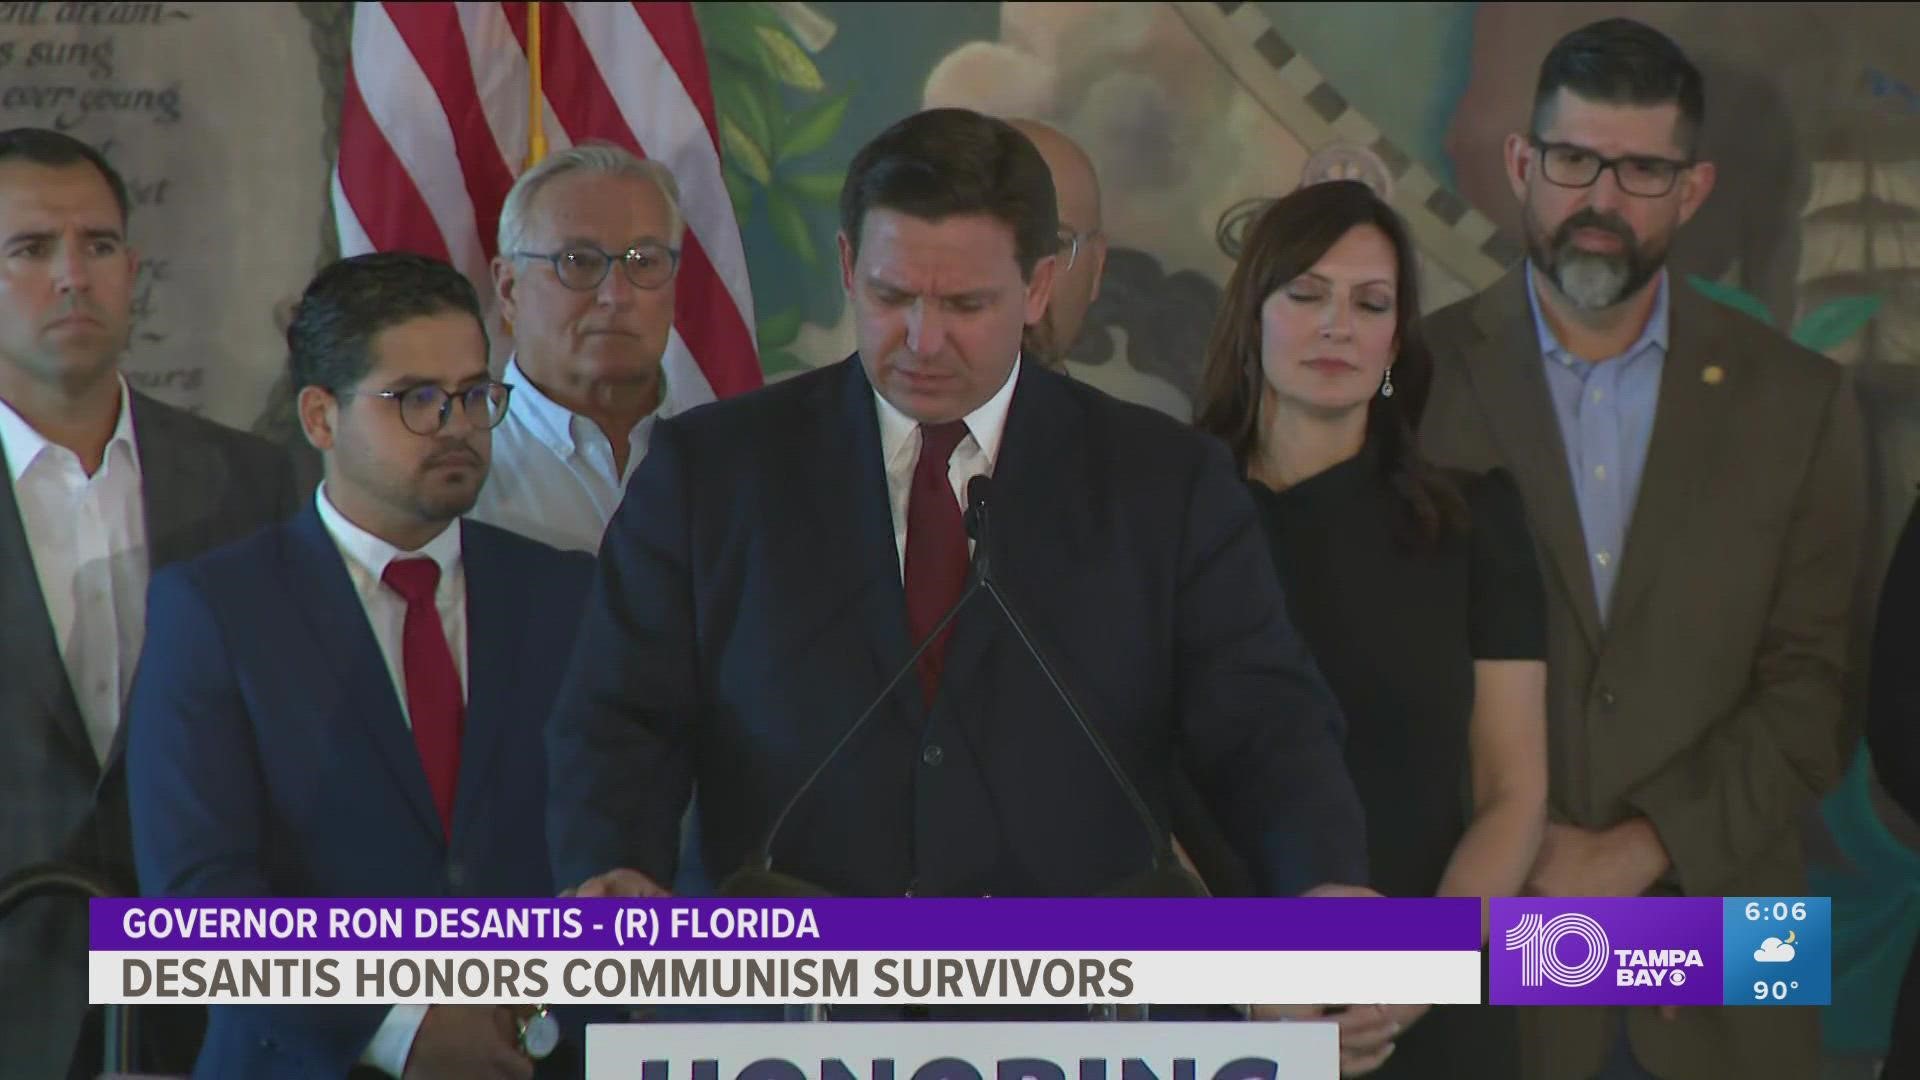 Lt. Gov. Jeanette Nuñez and State Sen. Manny Diaz joined the governor for the announcement and bill signing.